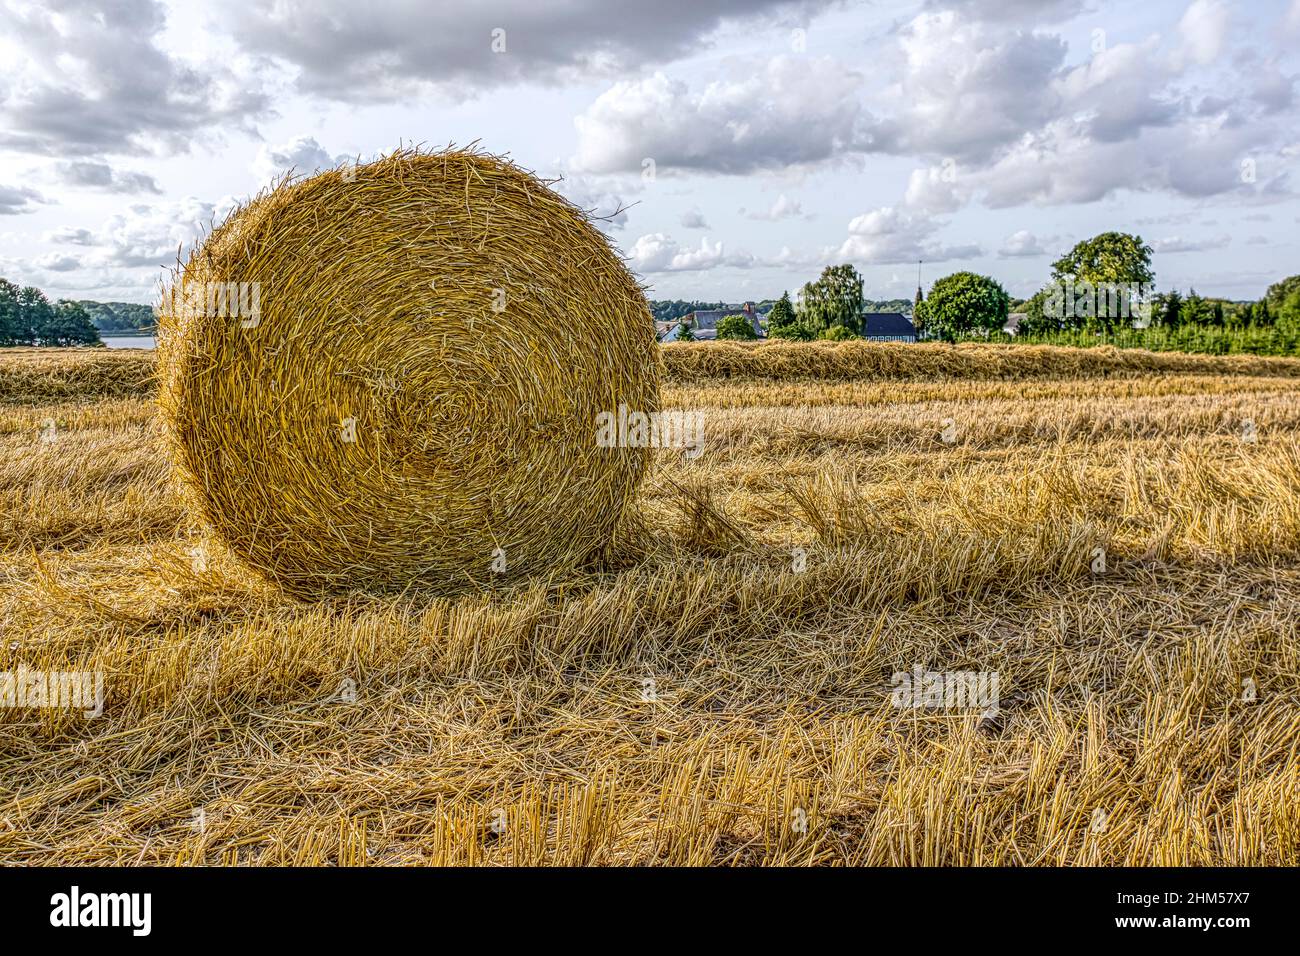 Big round hay bale in a stubble field, a bright sommer day in Jutland, Denmark, August 27, 2017 Stock Photo